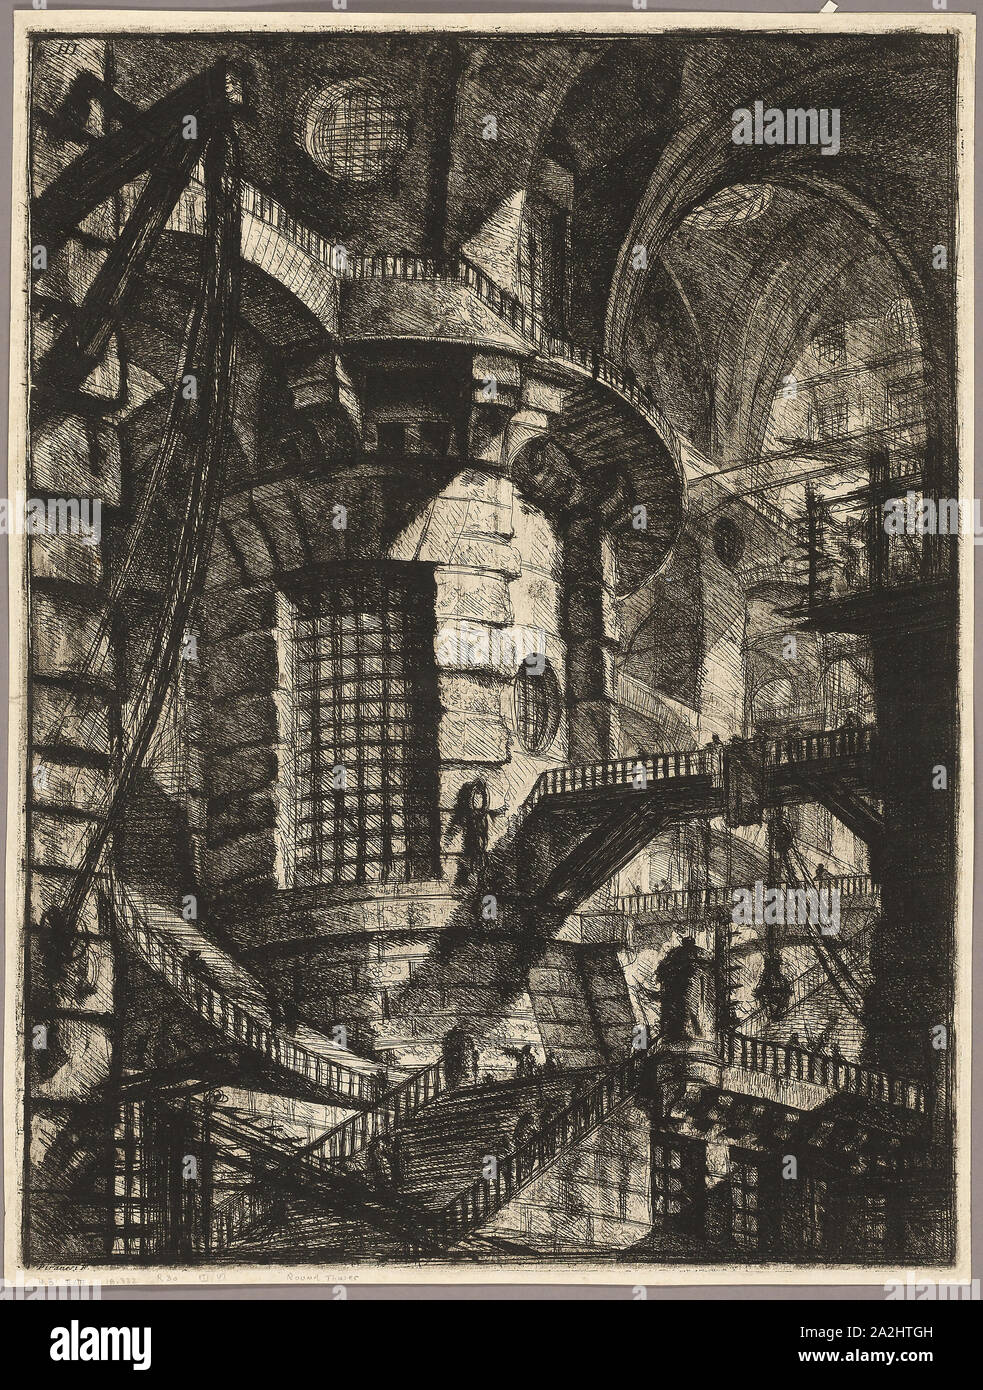 The Round Tower, plate 3 from the second edition of Carceri d’invenzione (Imaginary Prisons), 1750, reworked 1761, Giovanni Battista Piranesi, Italian, 1720-1778, Italy, Etching, engraving, sulphur tint, and burnishing in black on ivory laid paper, 542 x 410 mm (image), 549 x 416 mm (plate), 561 x 425 mm (sheet Stock Photo